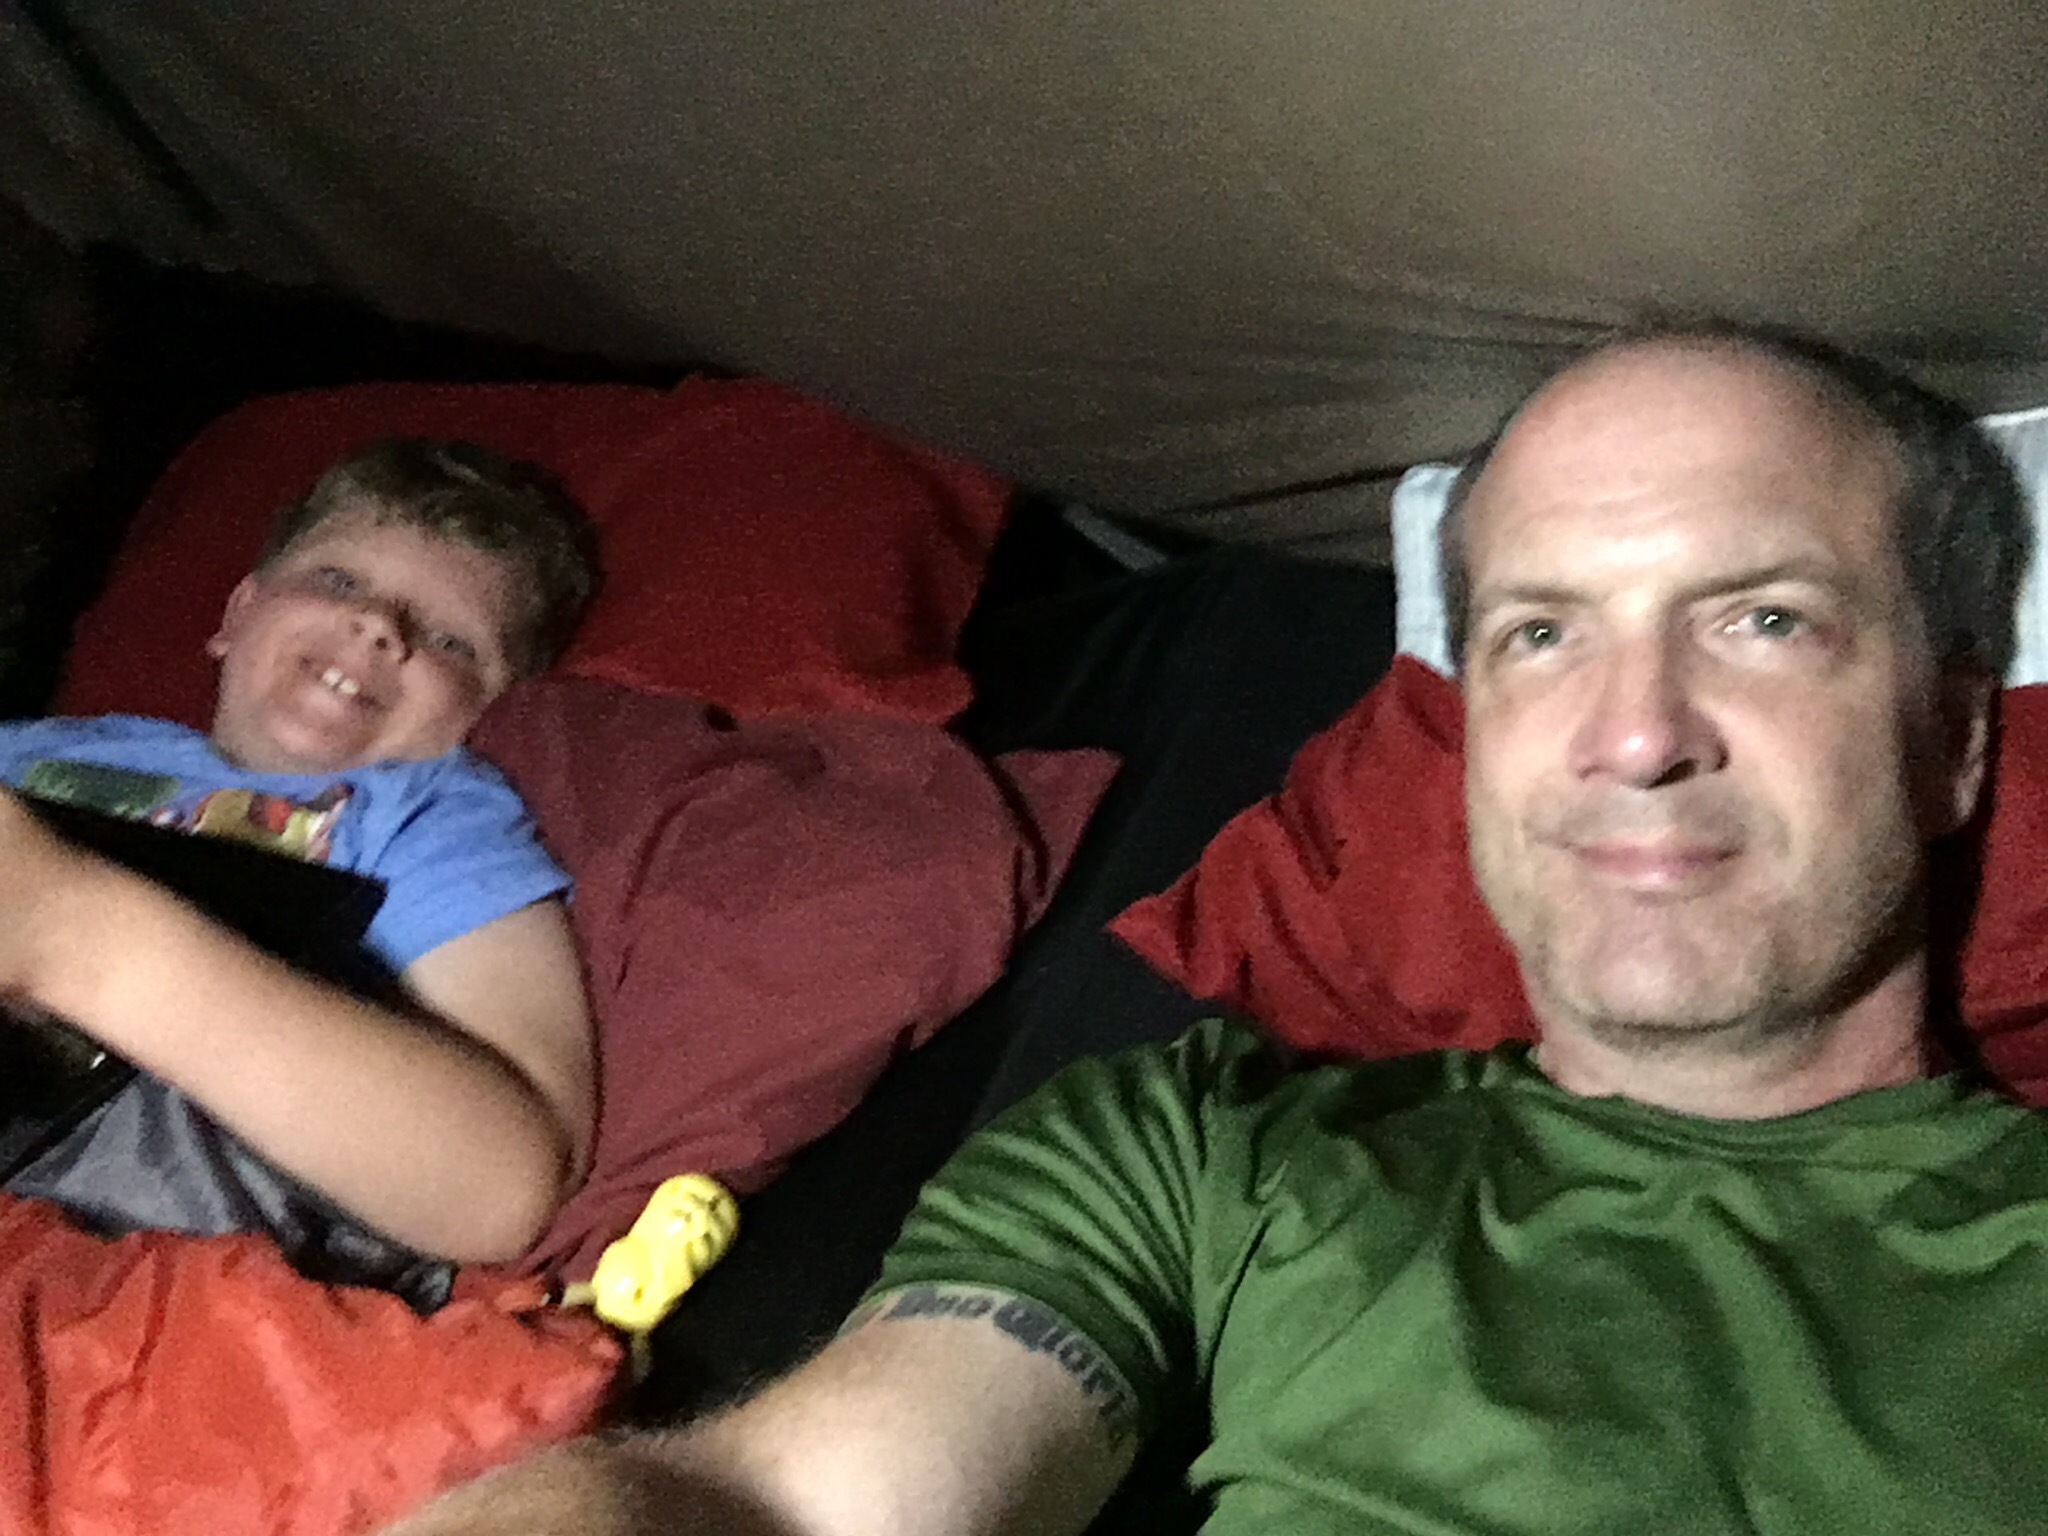 Augie and dad in the tent